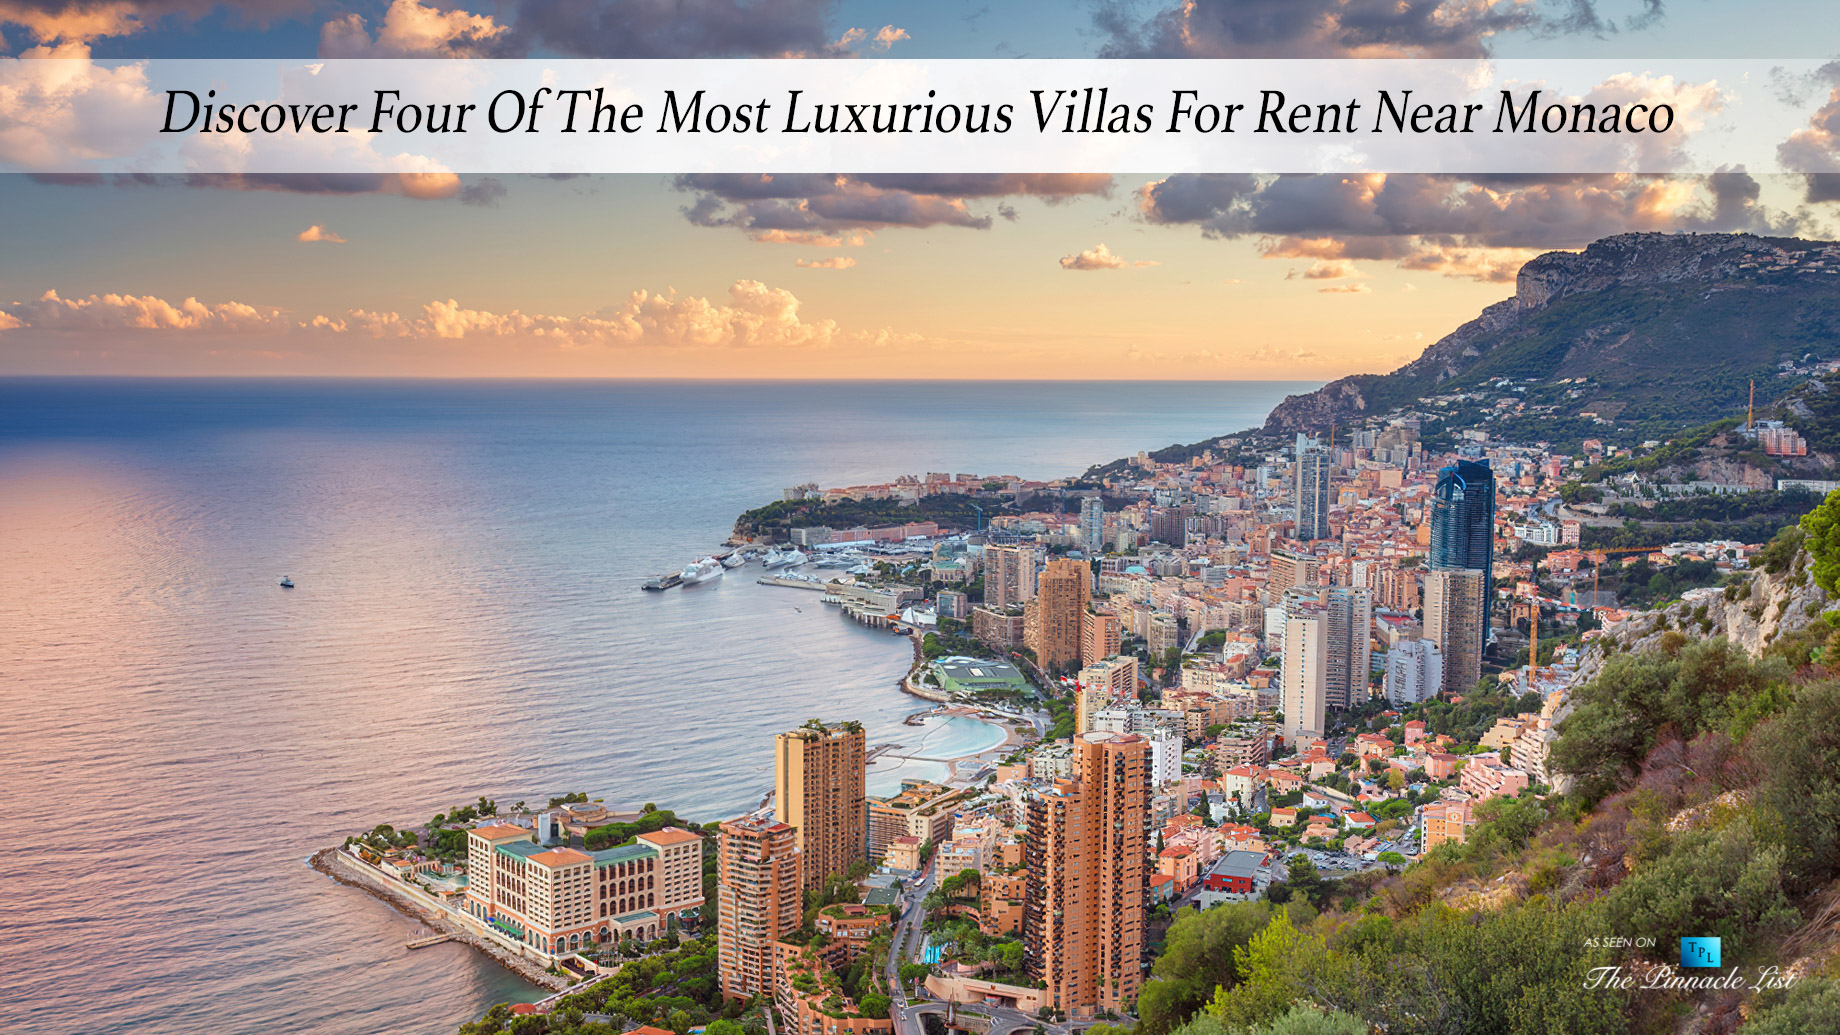 Discover Four of the Most Luxurious Villas for Rent Near Monaco